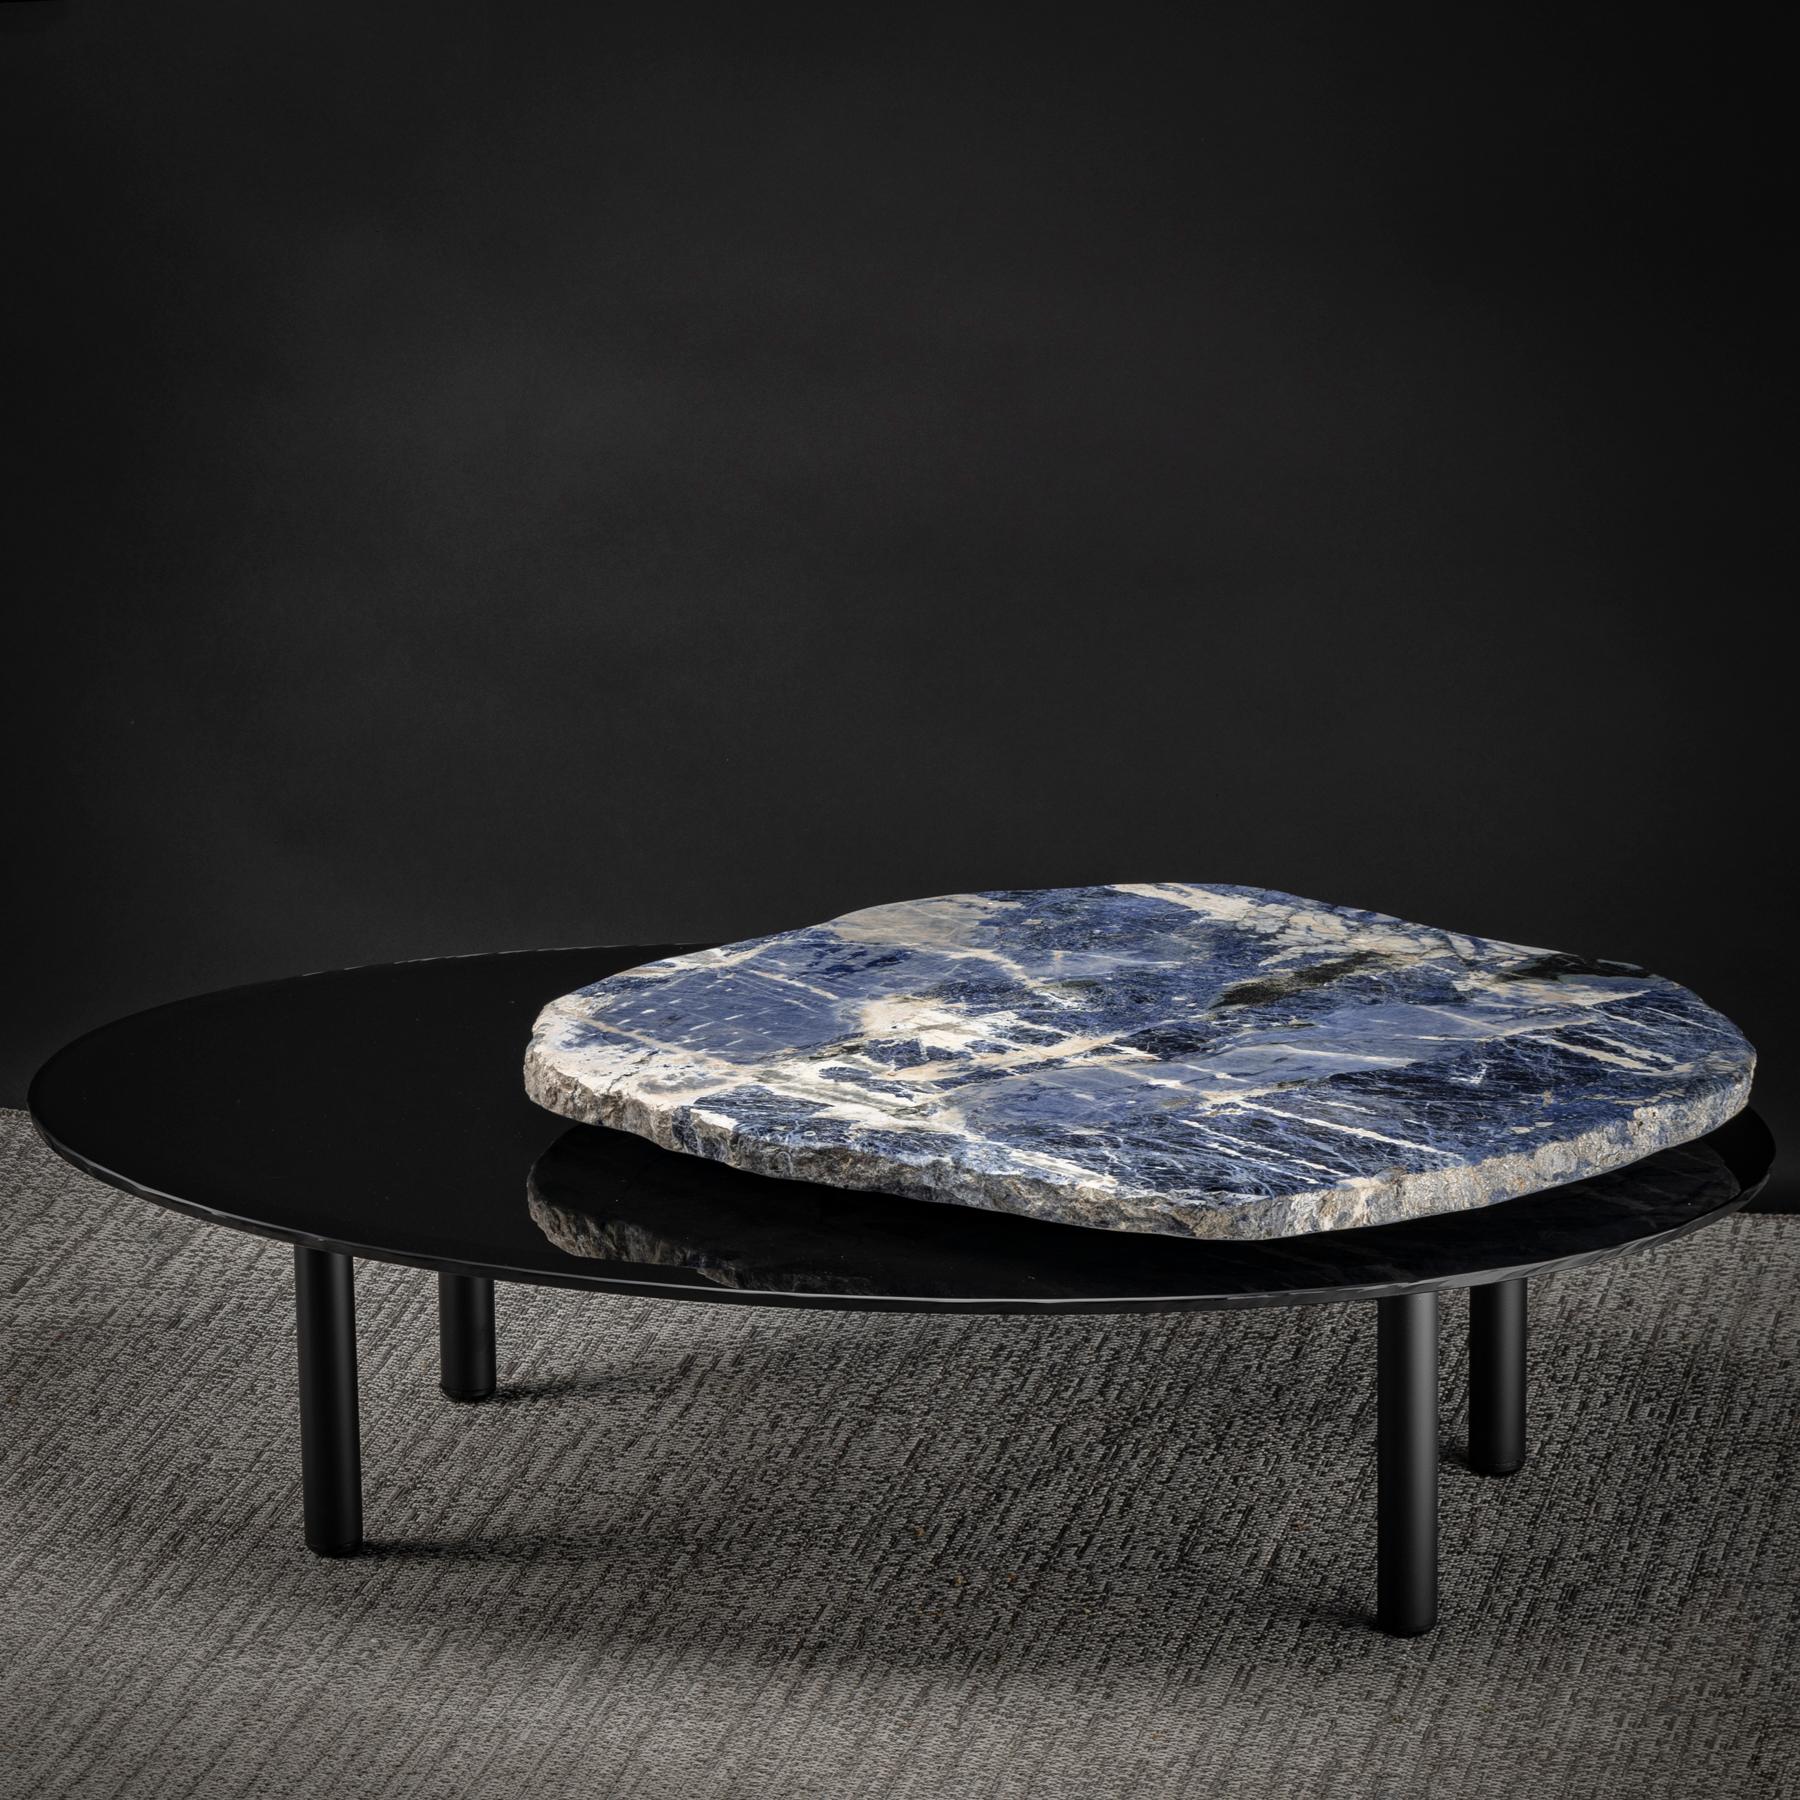 This center table is an original design featuring a 3-way rotating Brazilian sodalite slab.
The glass used for this table is tempered black color, 125mm thick.
 The agate size is: 31.6